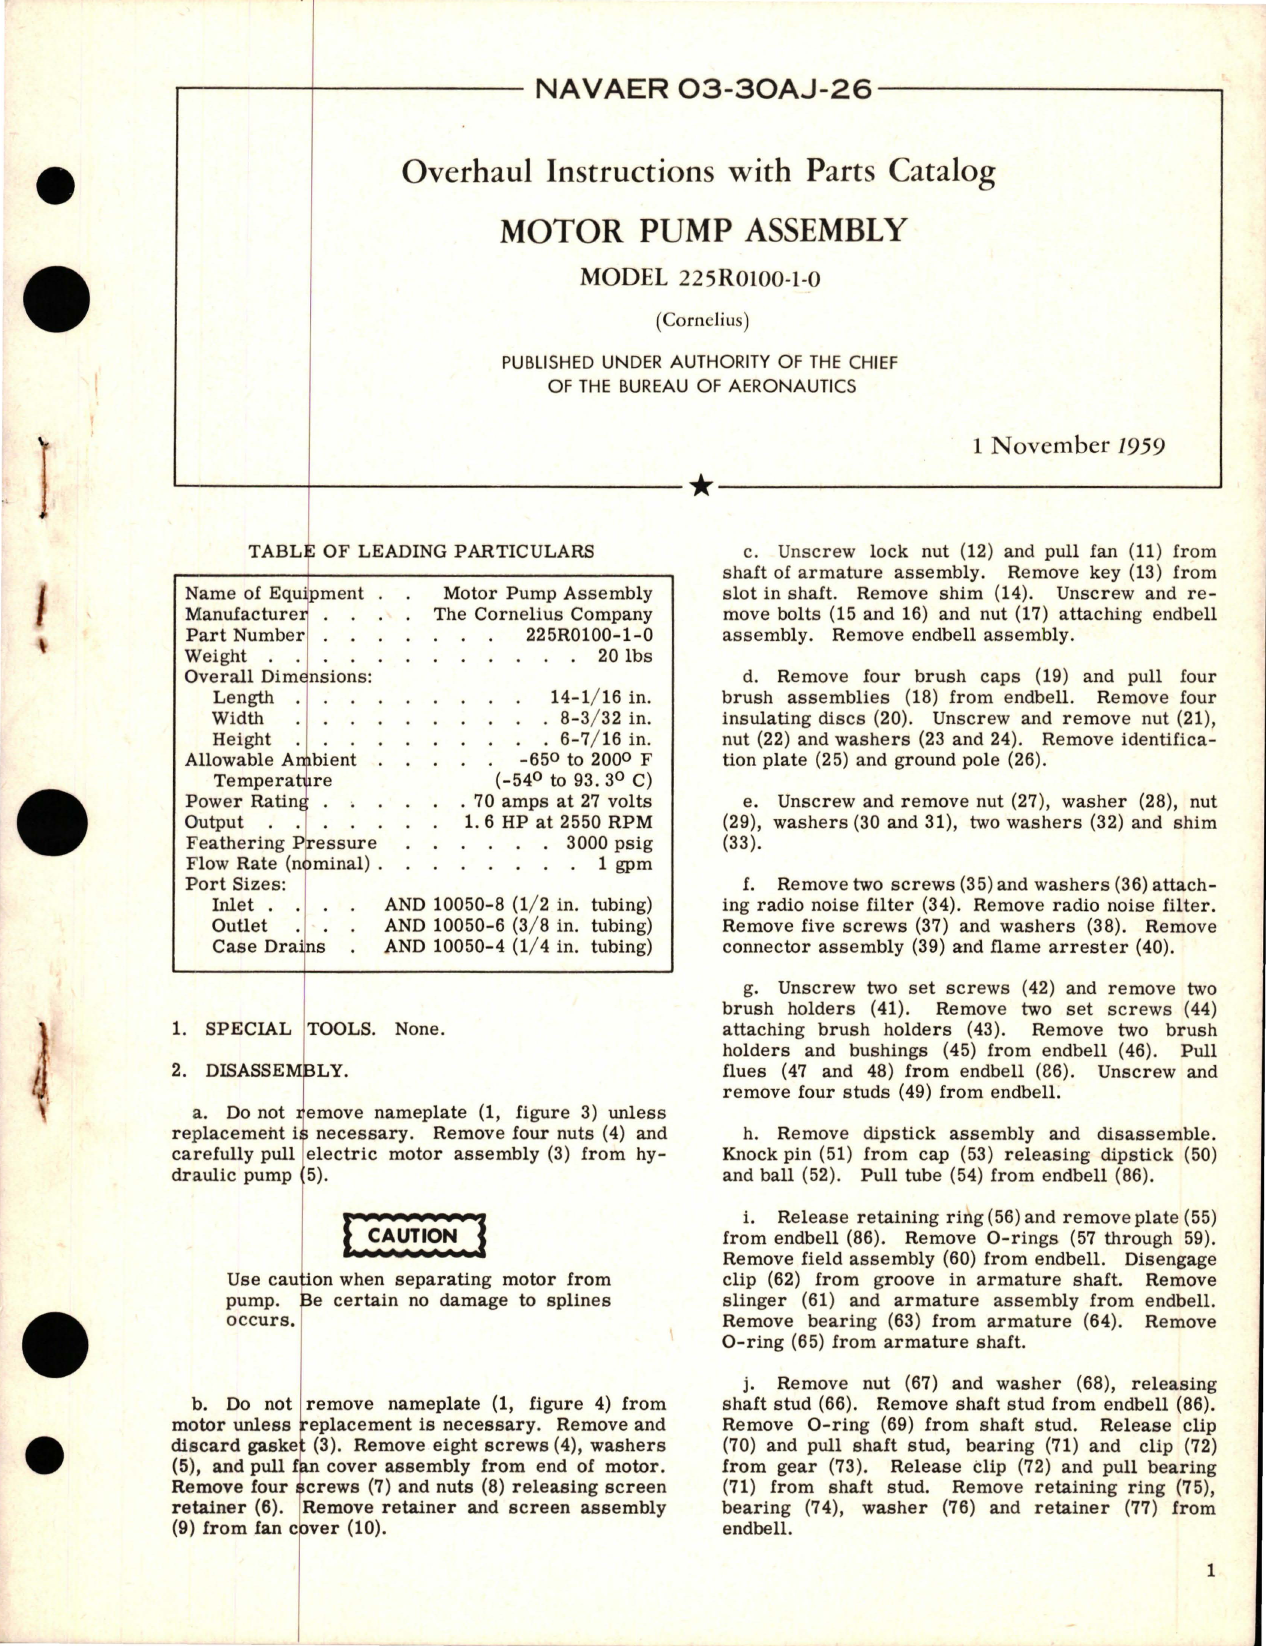 Sample page 1 from AirCorps Library document: Overhaul Instructions with Parts Catalog for Motor Pump Assembly - Model 225R0100-1-0 